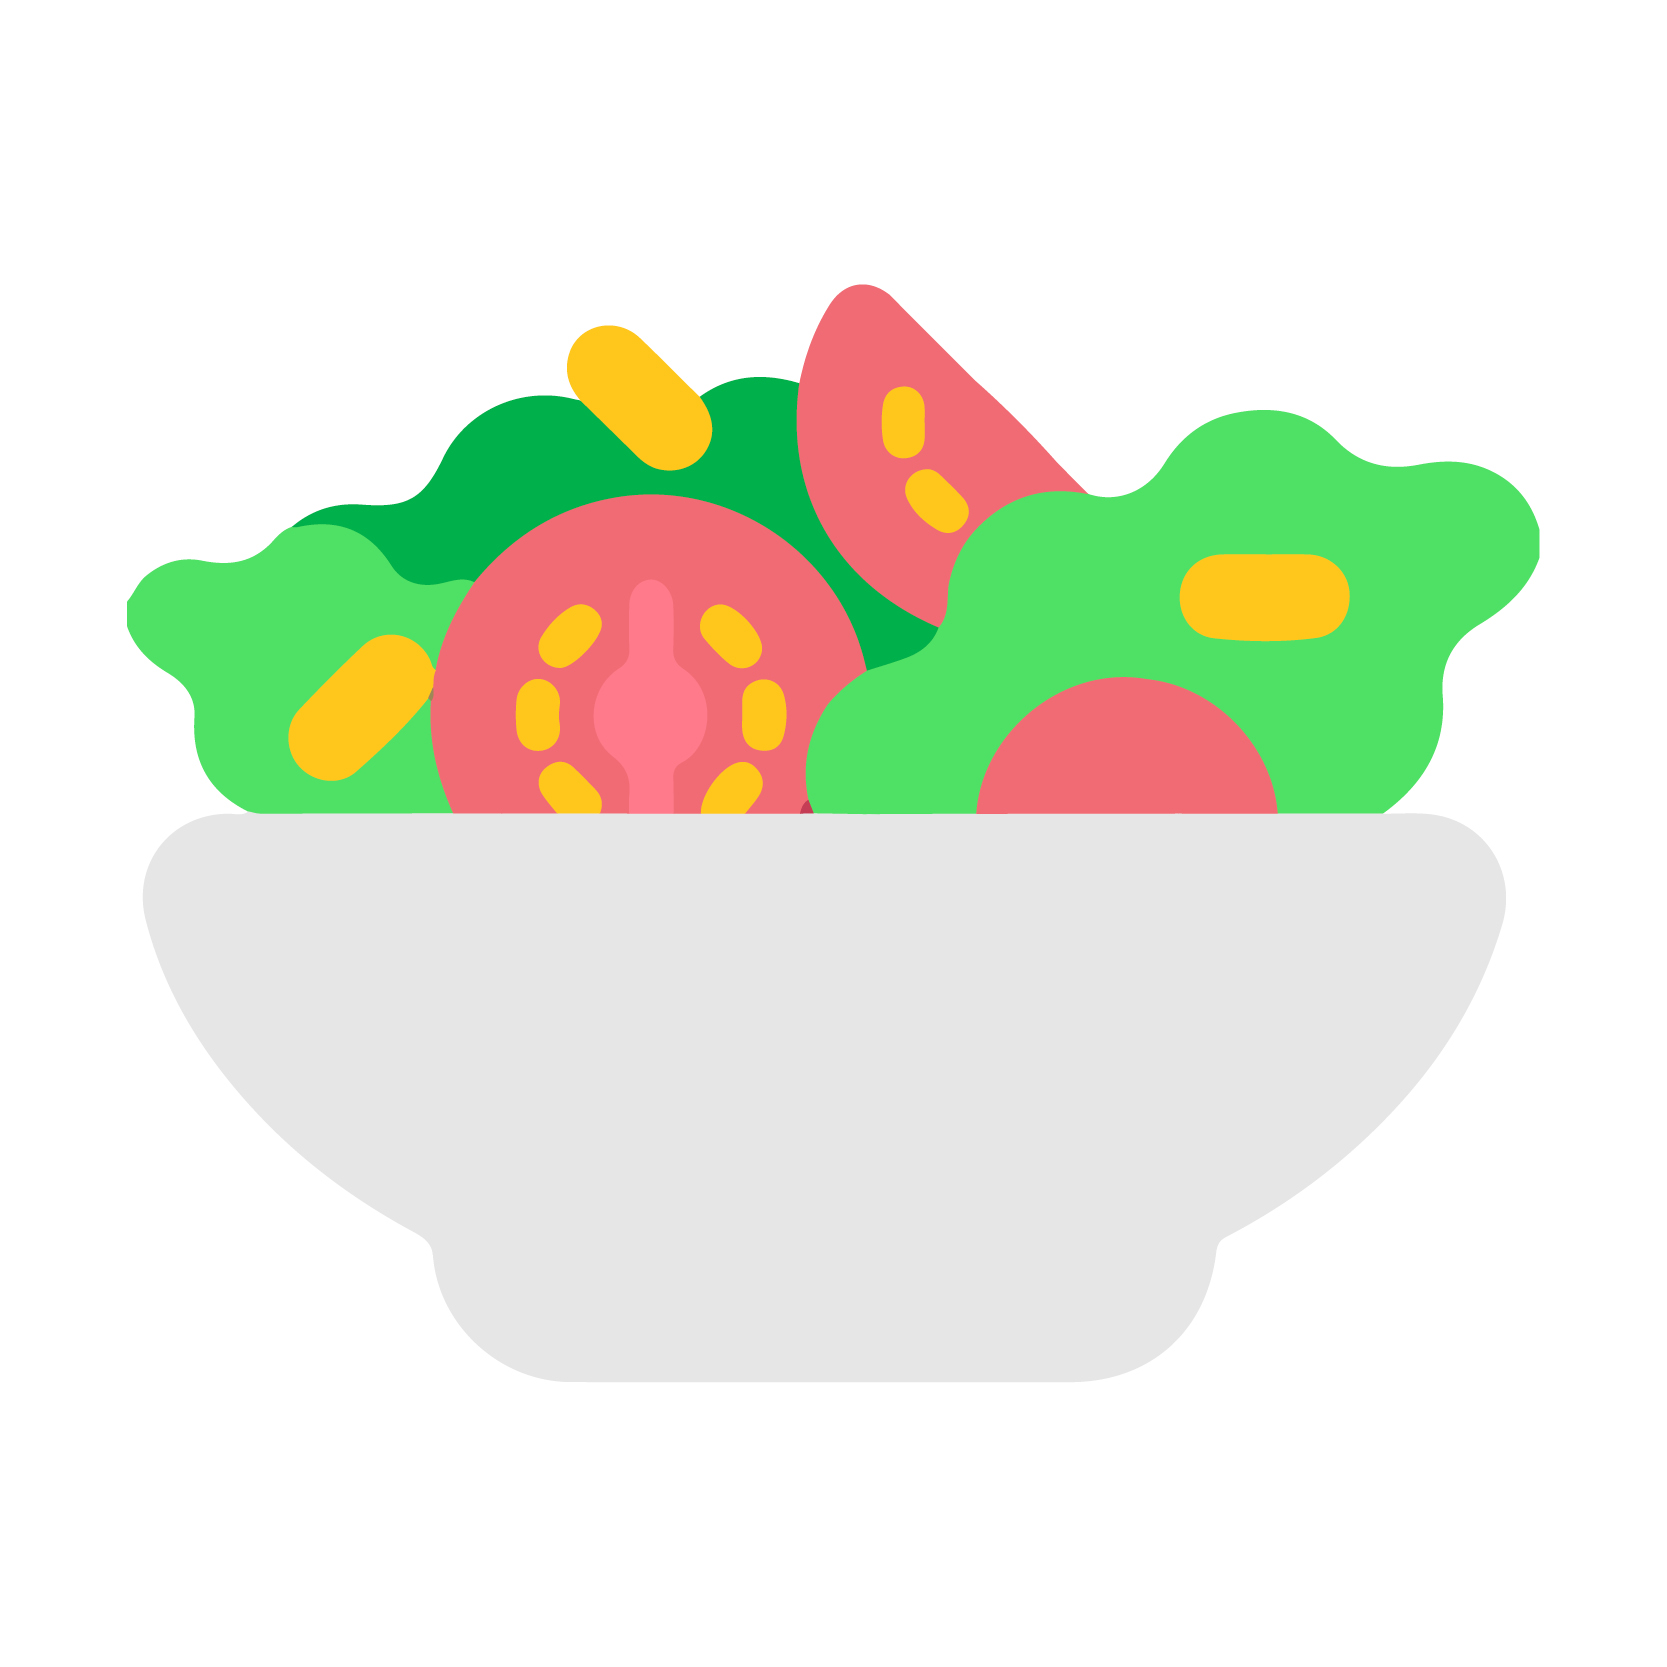 Icon of salad and tomatoes in a bowl